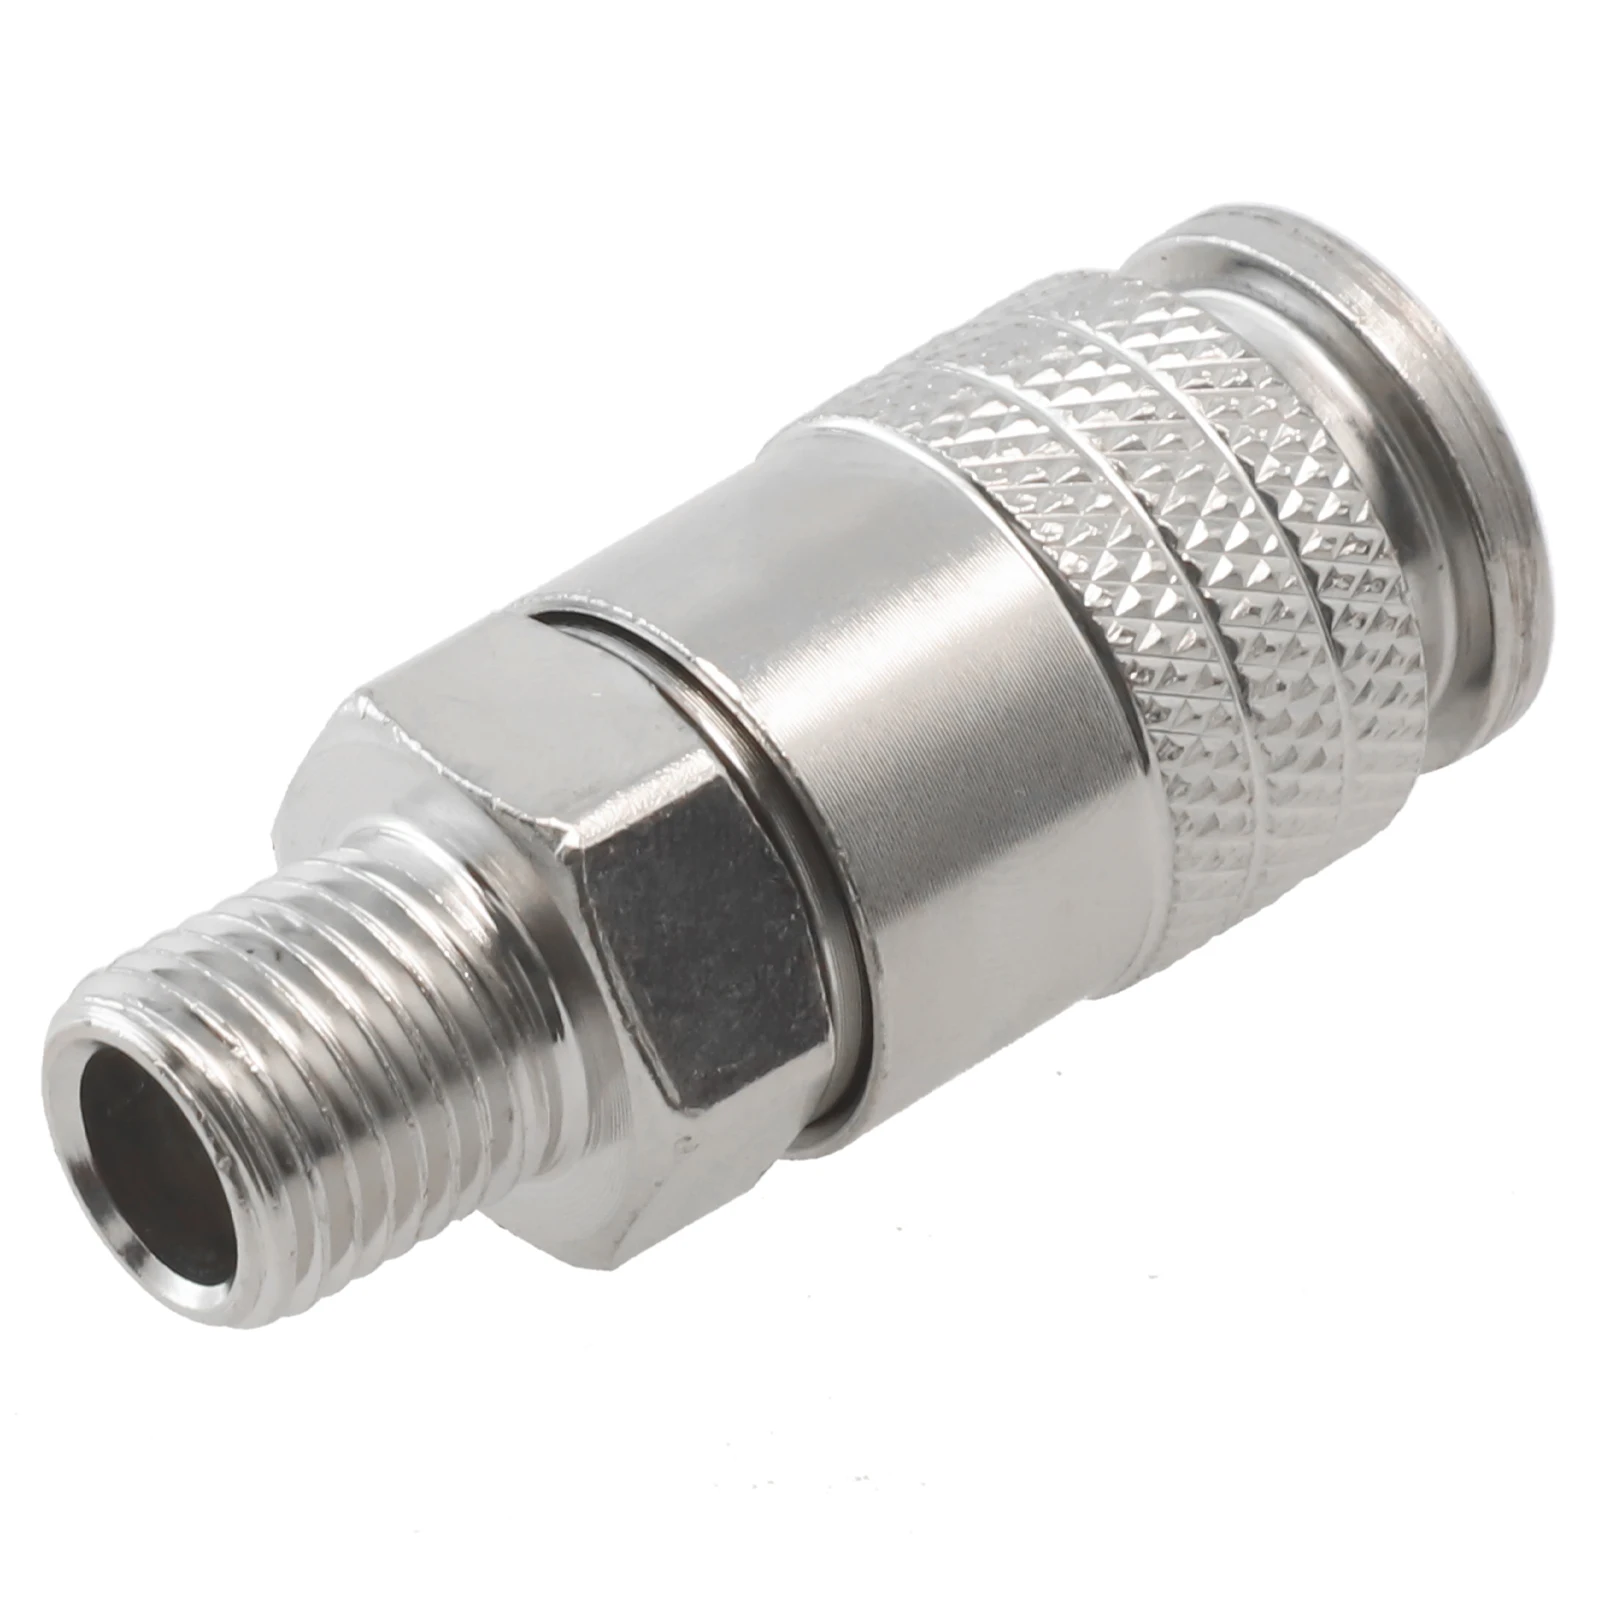 Pneumatic Fitting G1/4 Male Thread EU Standard Quick Connector For Air Compressor 53mm Length Air Compressor Tool Parts usb 2 0 male to firewire ieee 1394 4 pin male ilink cable length 1 2m